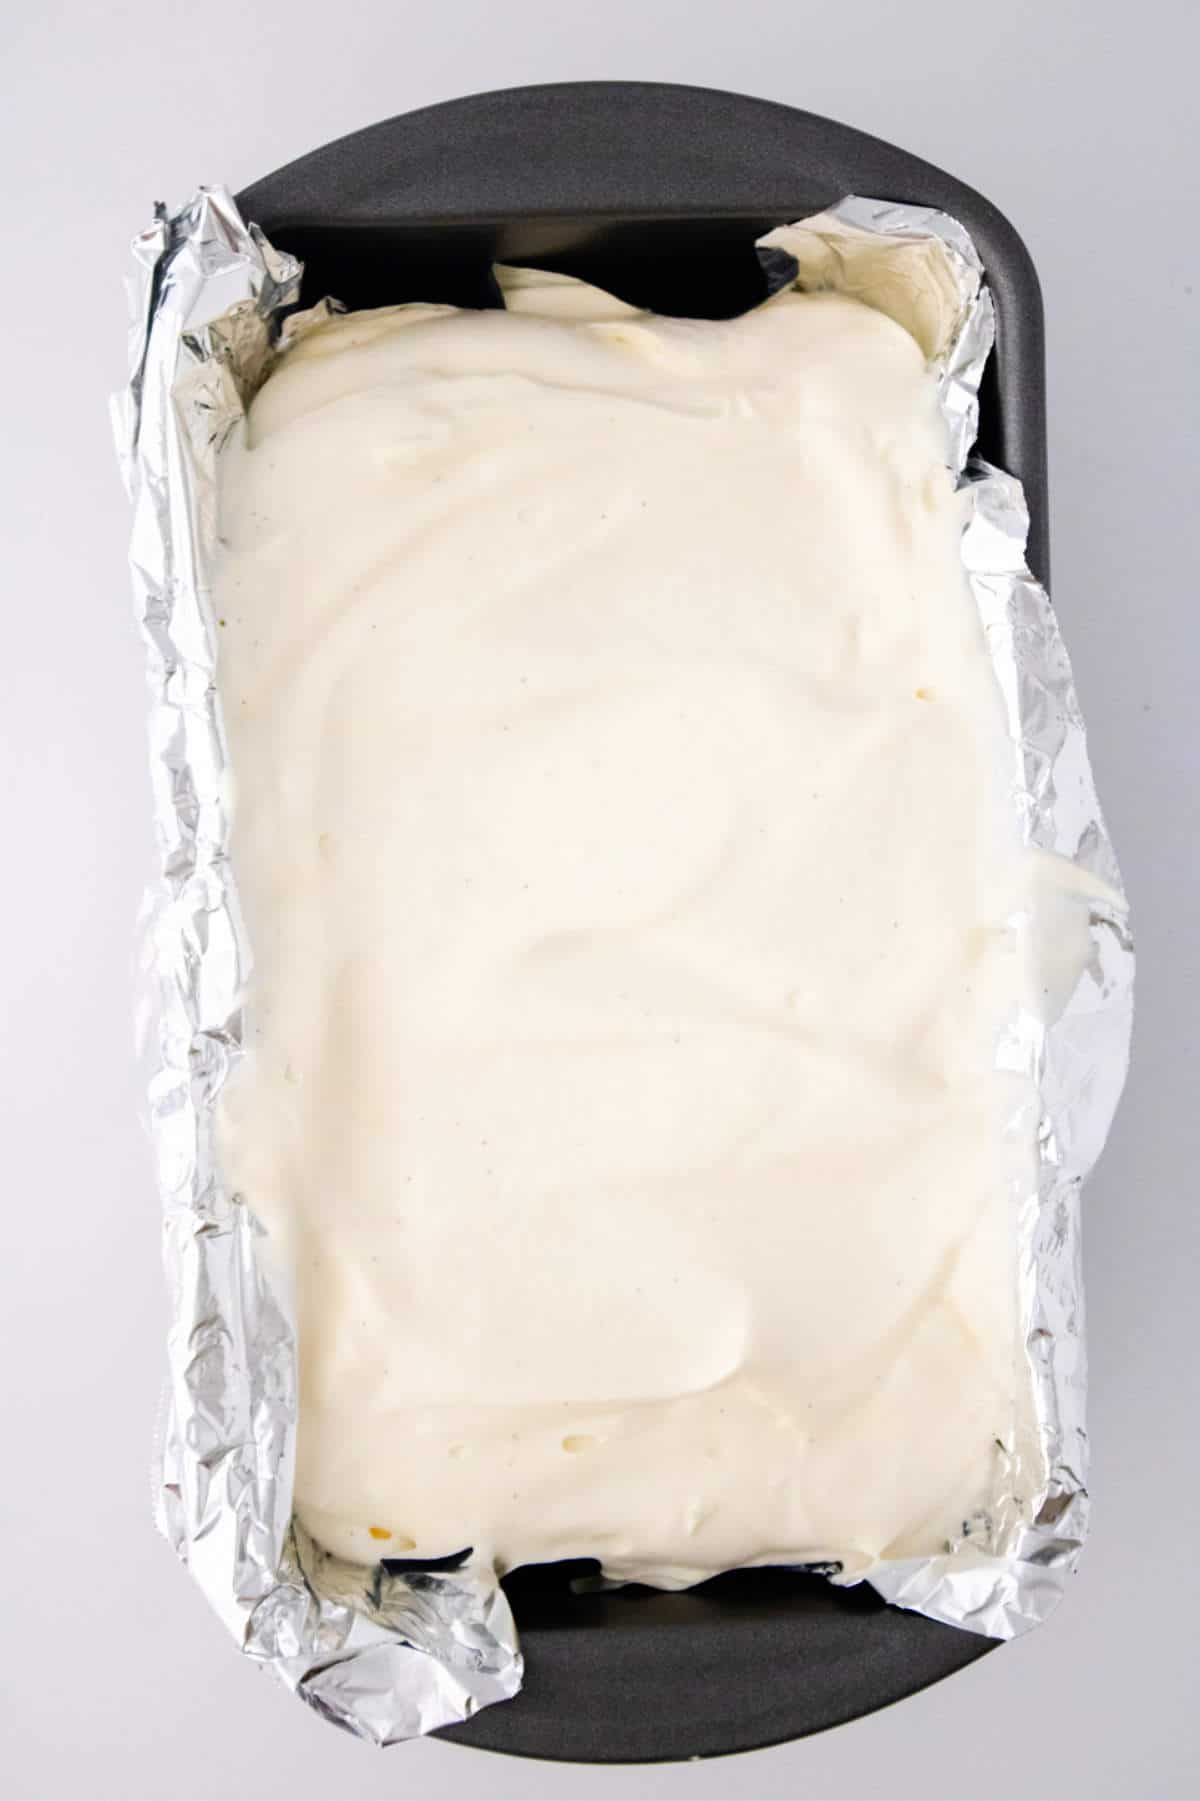 vanilla mixture poured into an aluminum foil lined loaf pan.